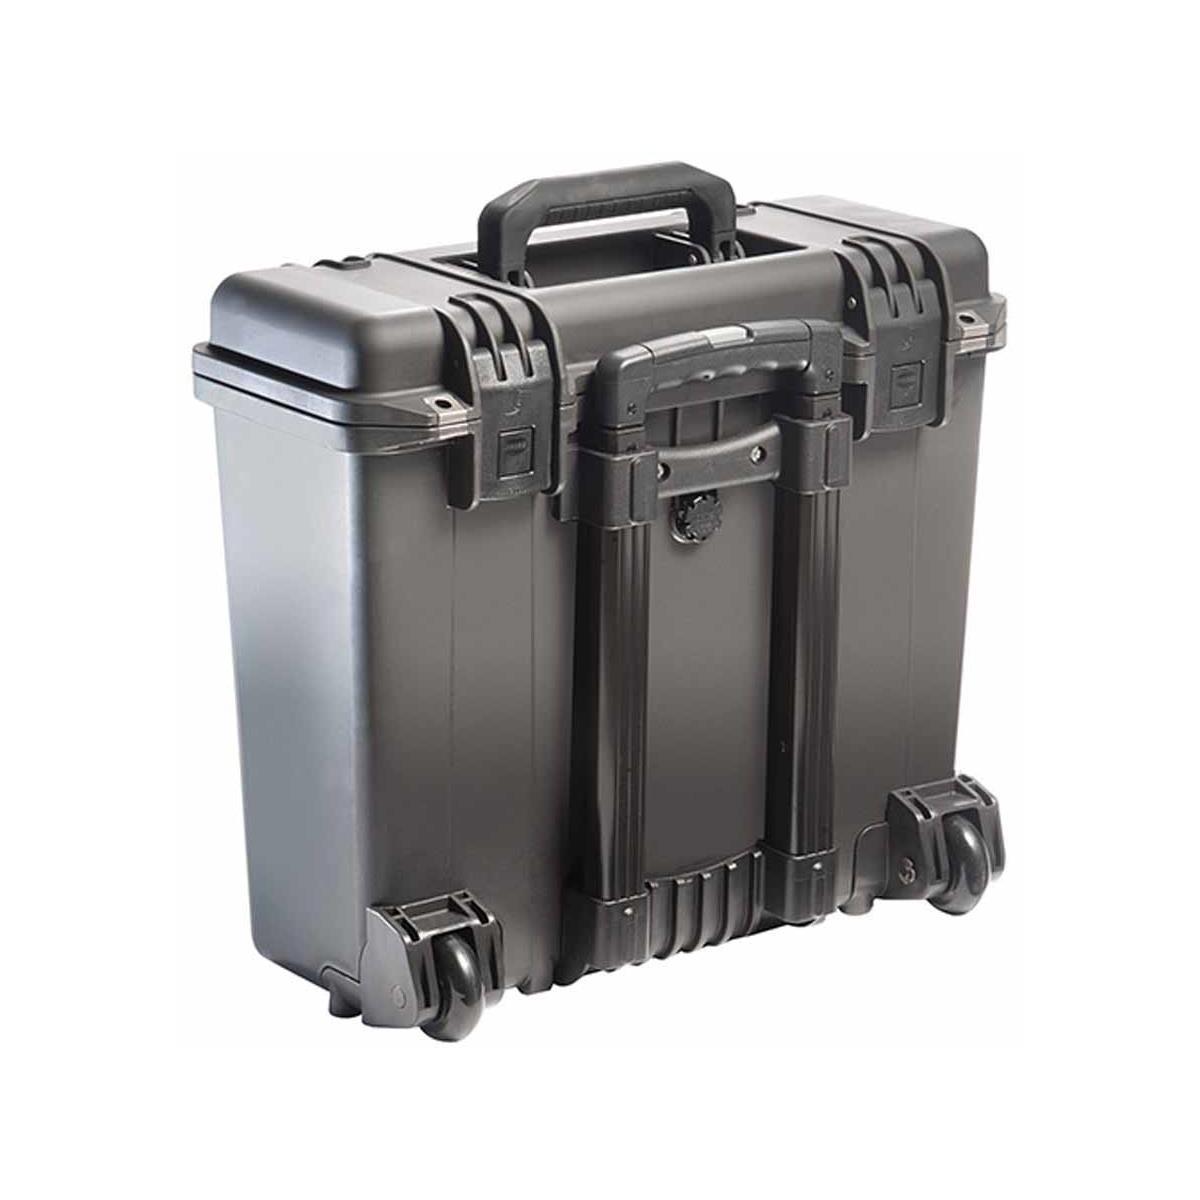 Image of Pelican iM2435 Top Loader Case without Foam